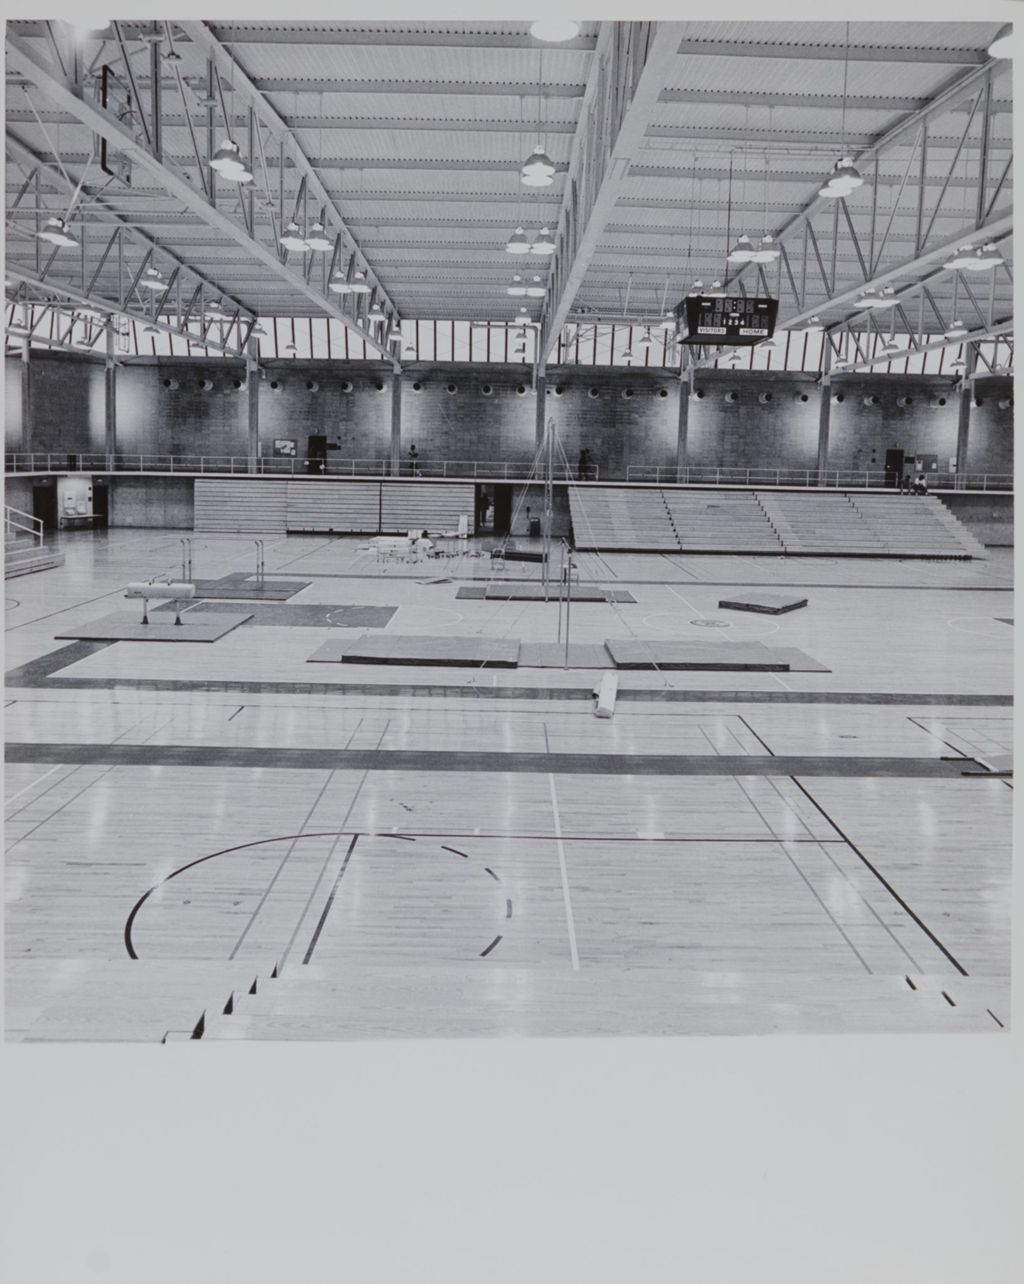 Miniature of Interior of the Main Gym, Physical Education building